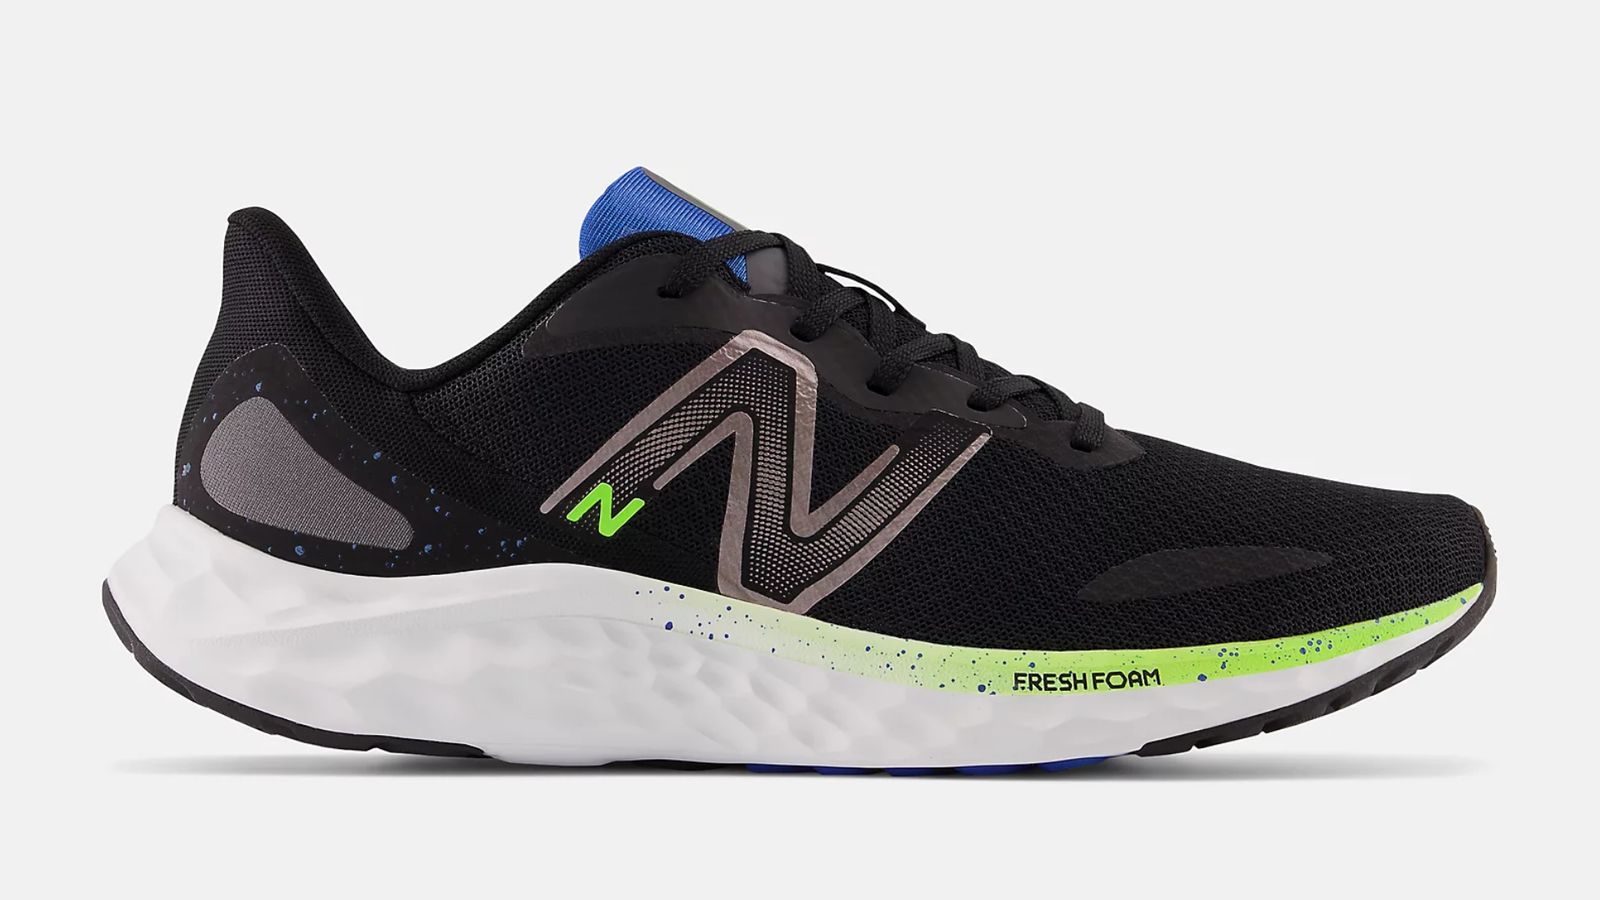 New Balance Arishi V4 product image of a black running shoe with a white midsole featuring a blue tongue and light green details.